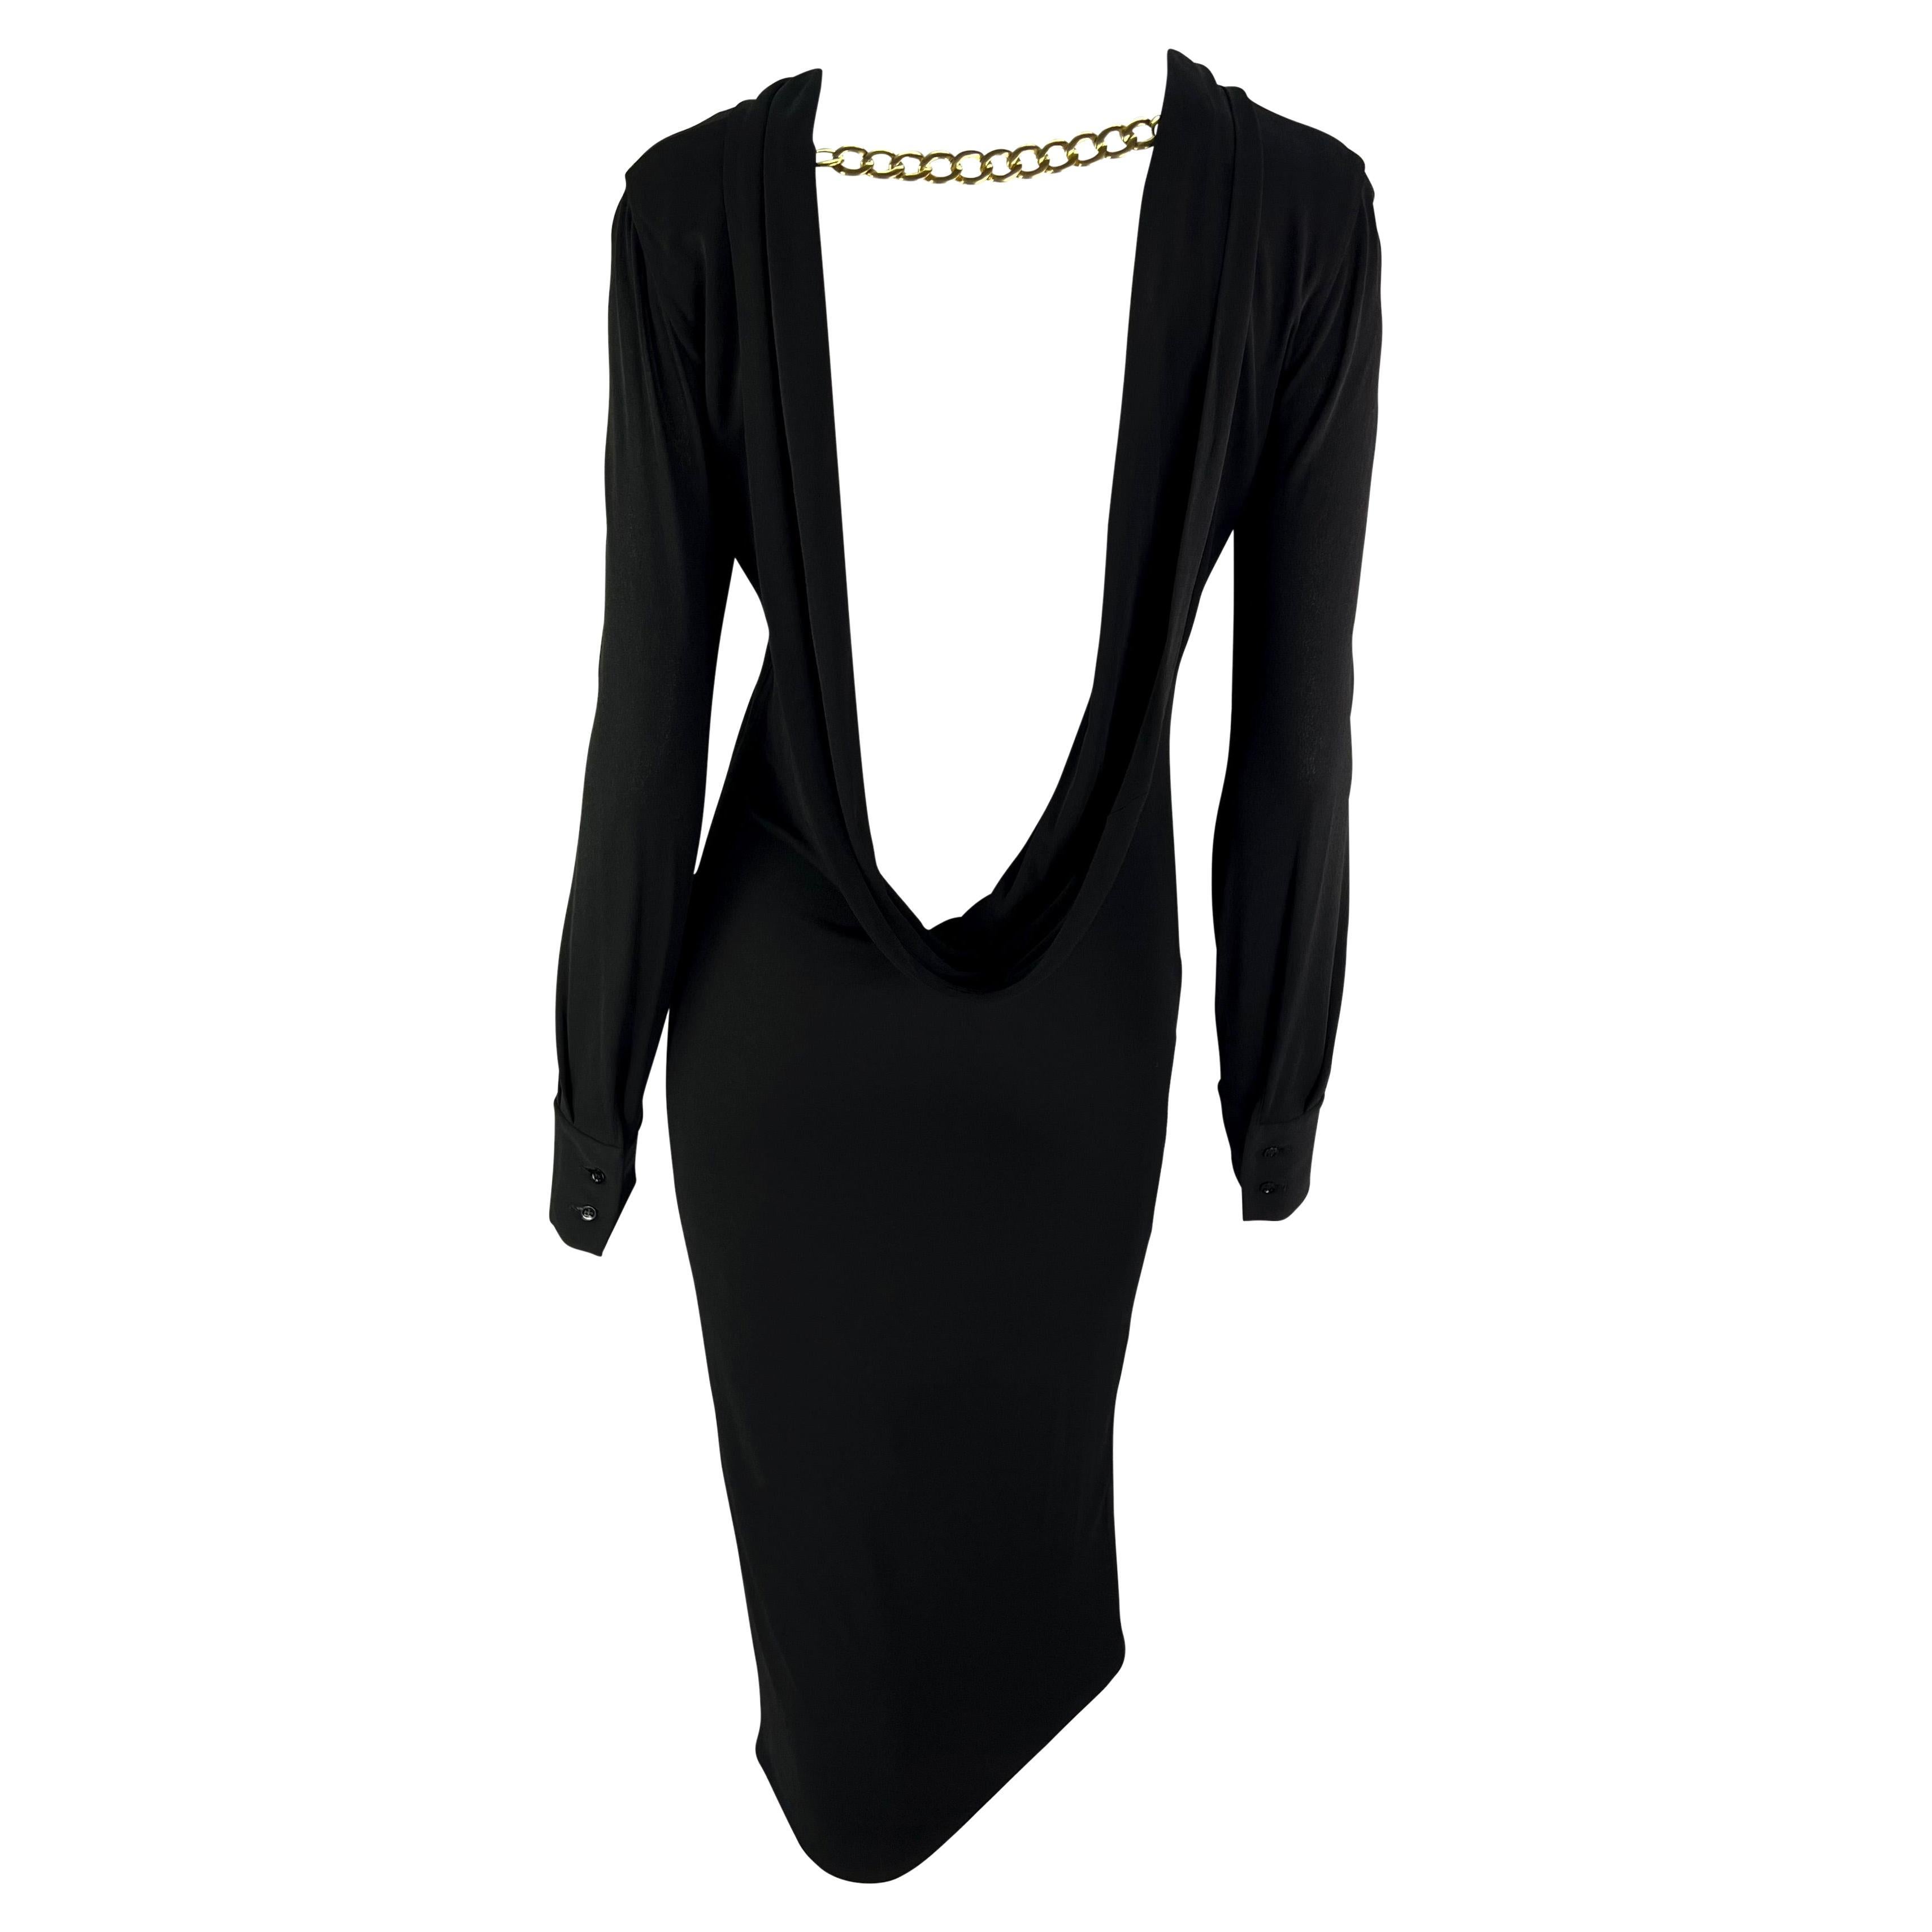 NWT 2006 Alexander McQueen Gold Chain Backless Black Cowl Dress For Sale